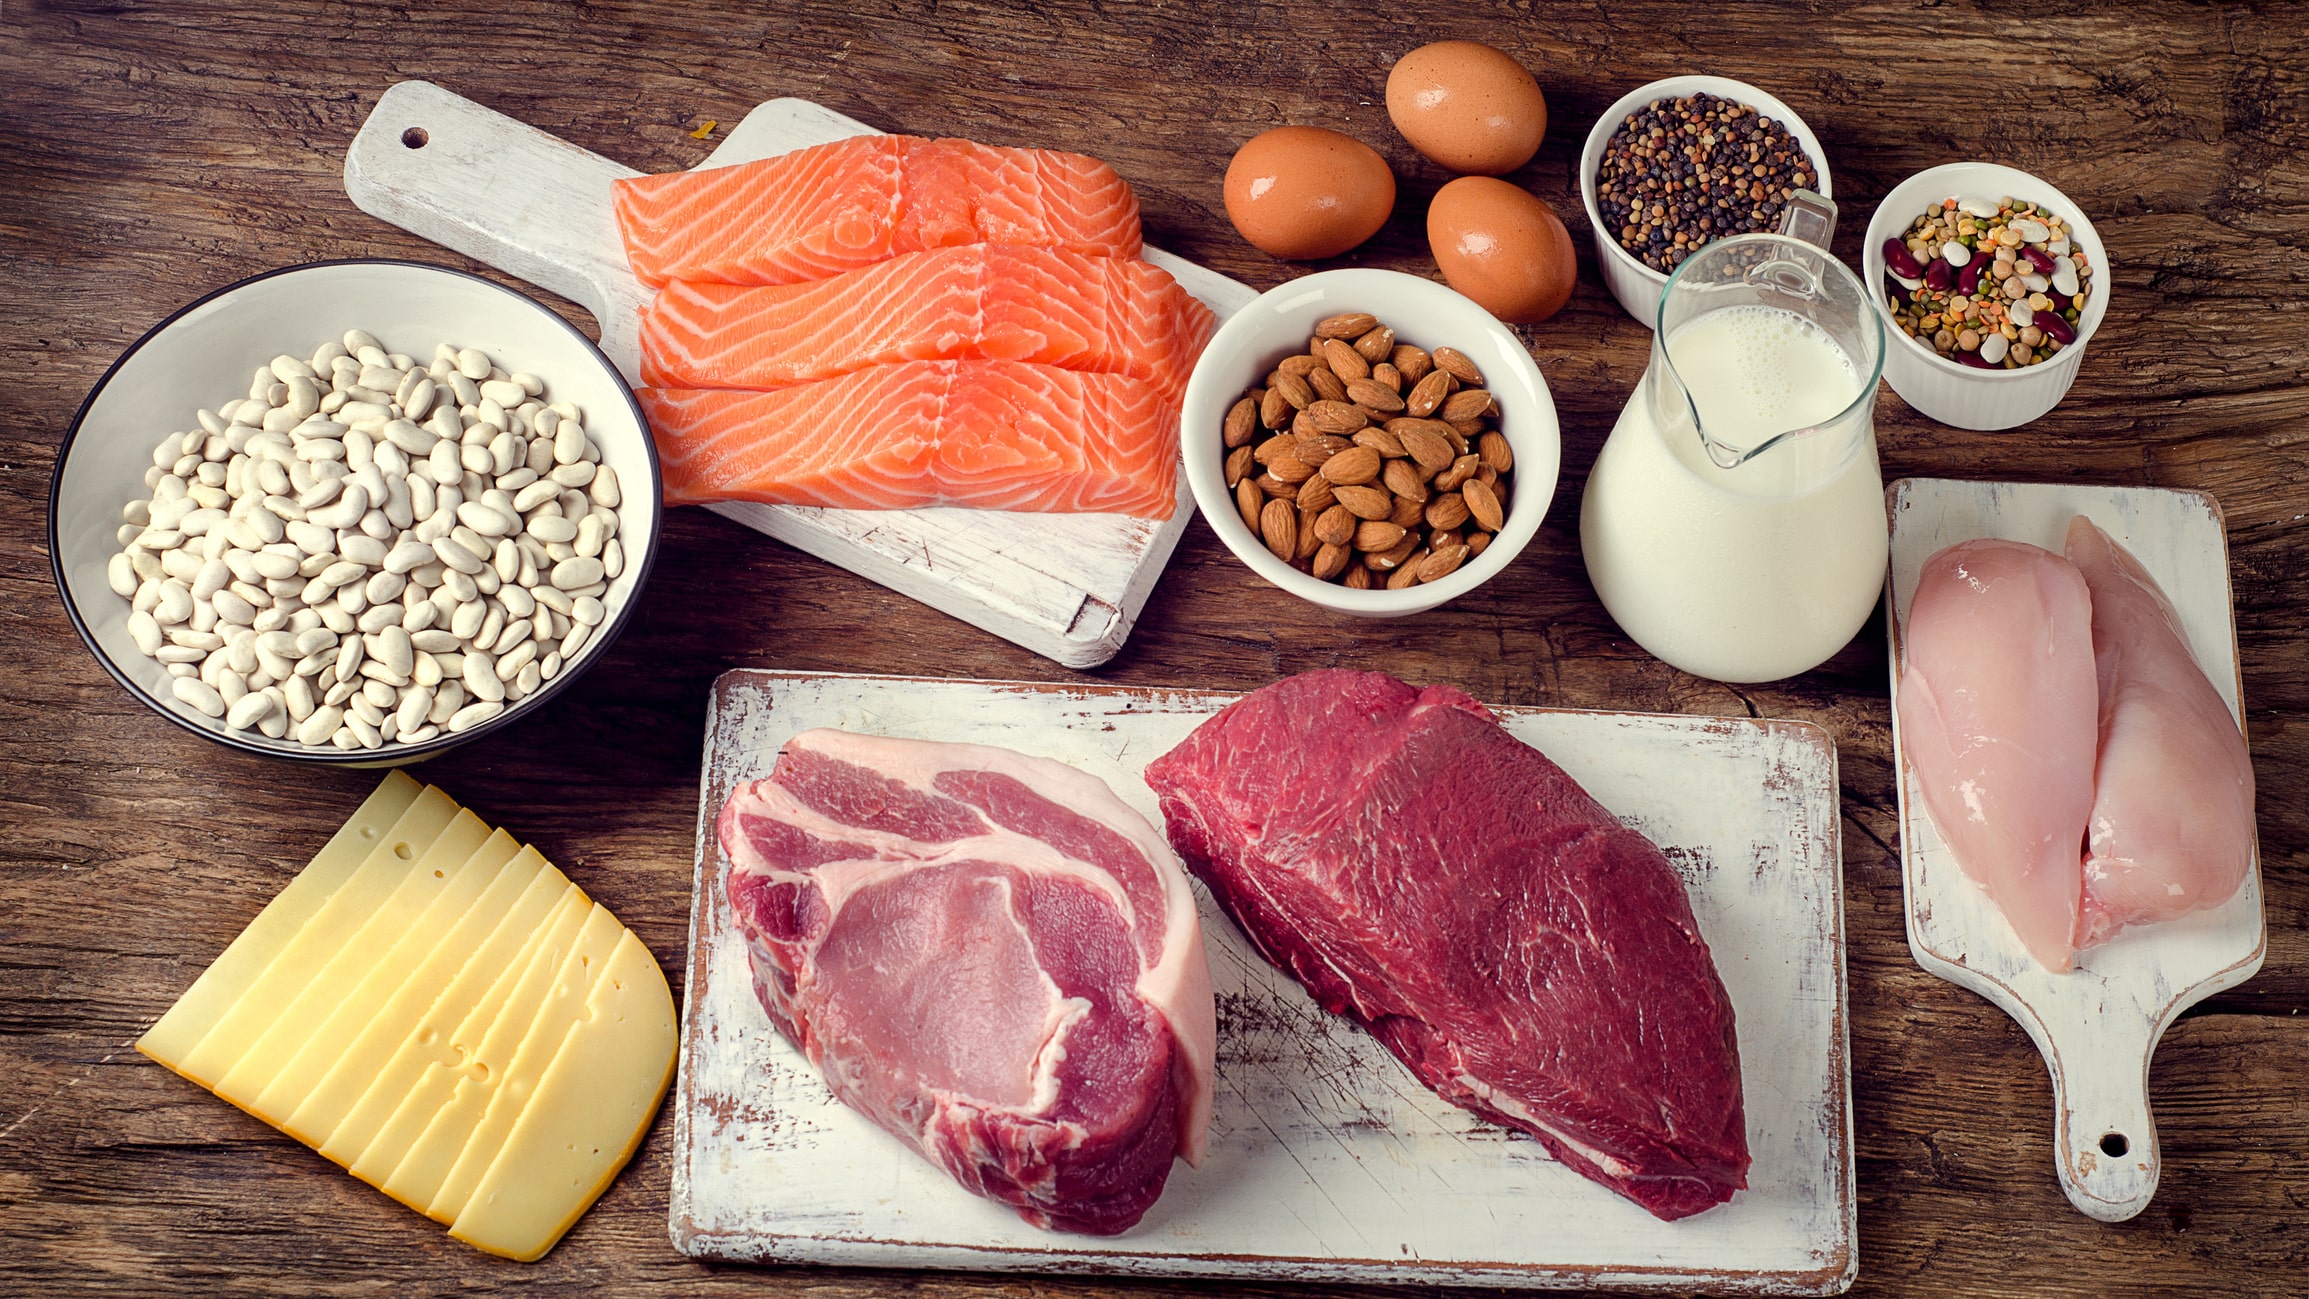 Higher Protein Intake May Lower ...